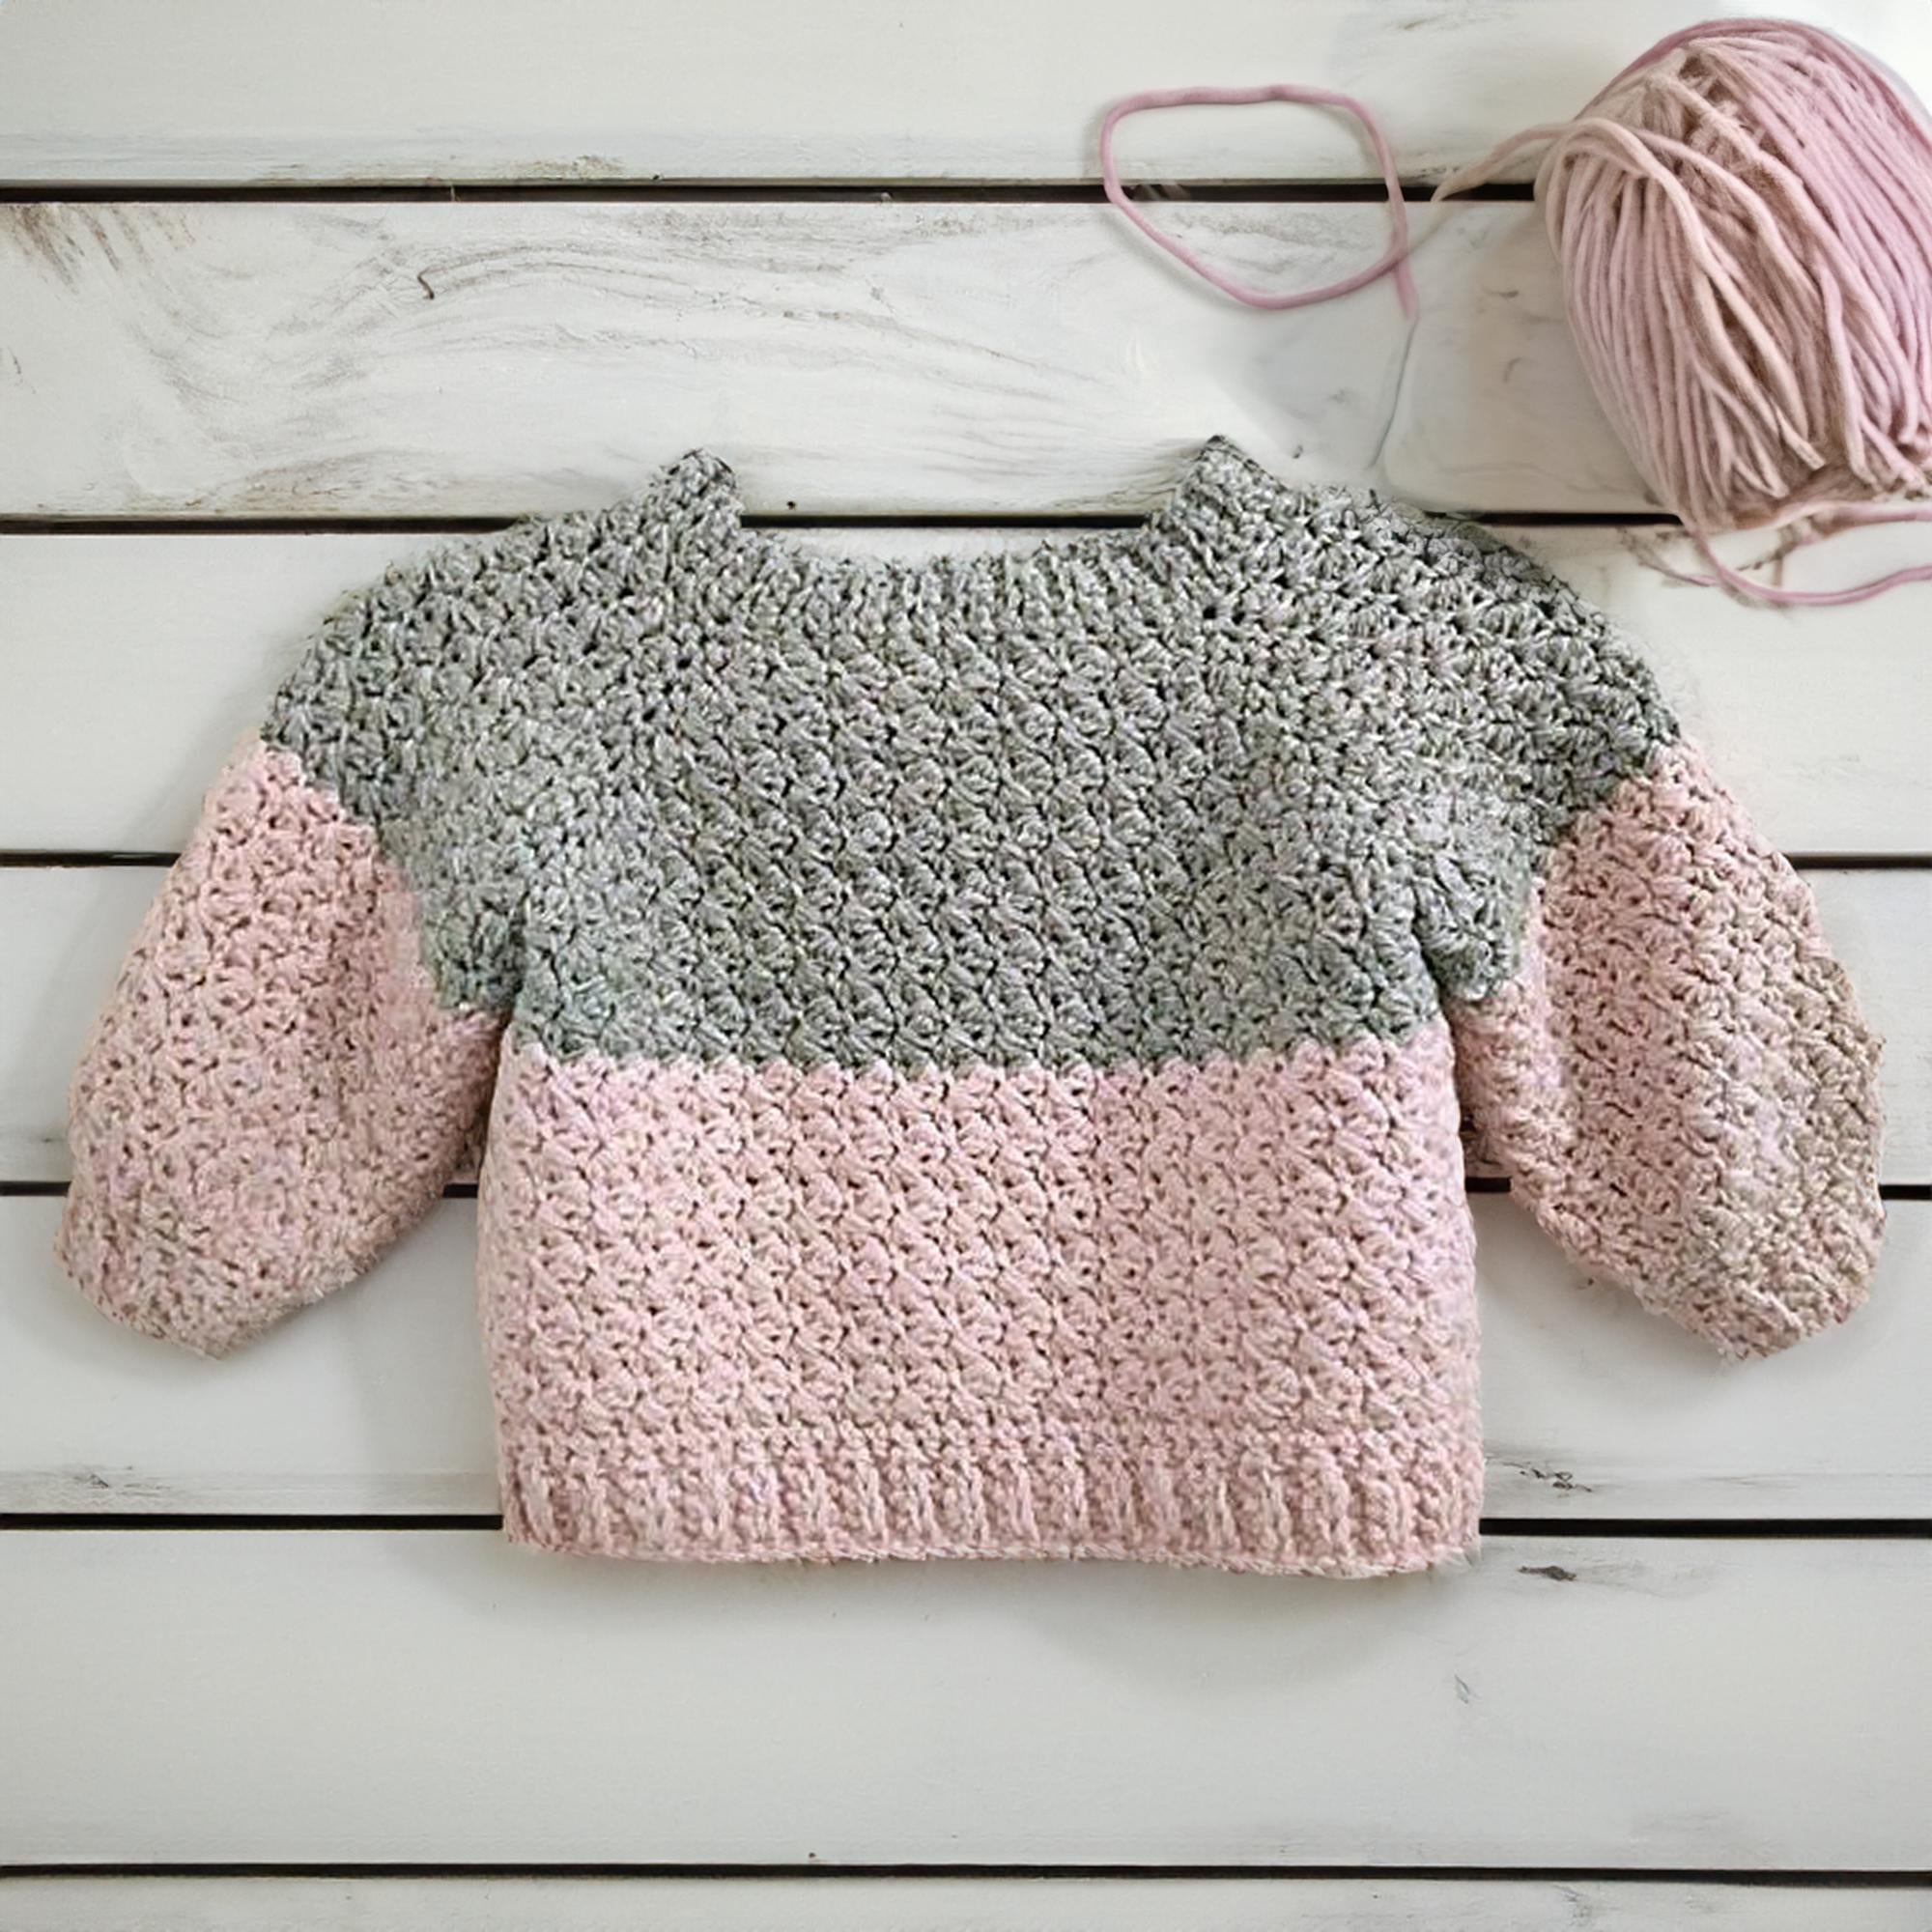 Snugly Textured Baby Sweater